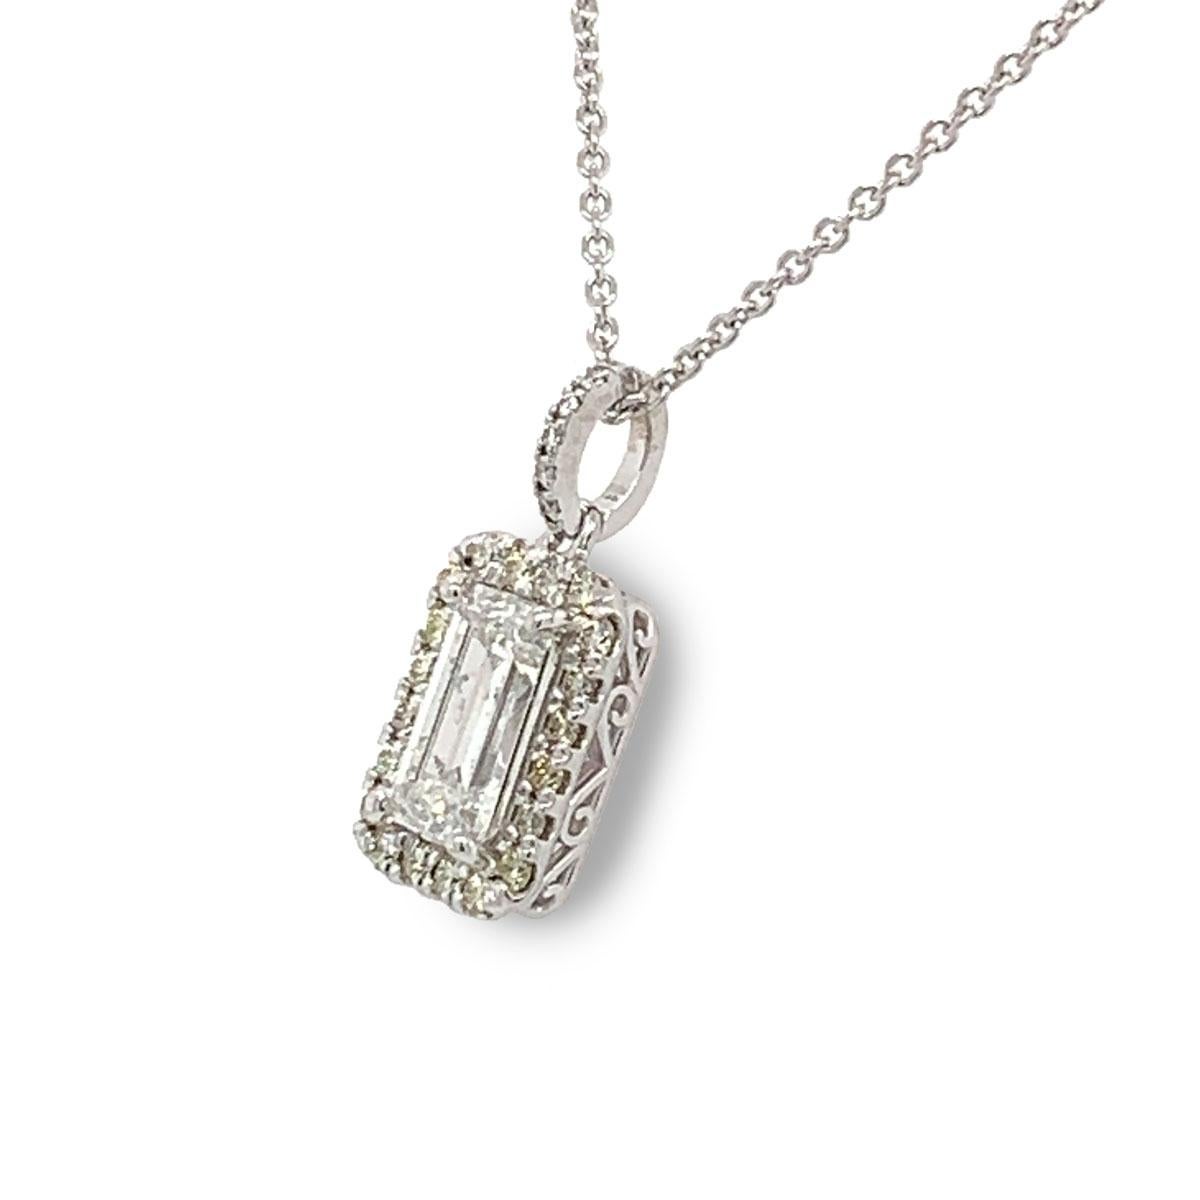 These extraordinary 18k White gold pendant features a 1.63 carat  an Emerald Cut Diamond G in color and I1 in clarity GIA certified. The diamond is framed in a halo of brilliant diamonds in a 0.32 carat total weight. This pendant is ideal for